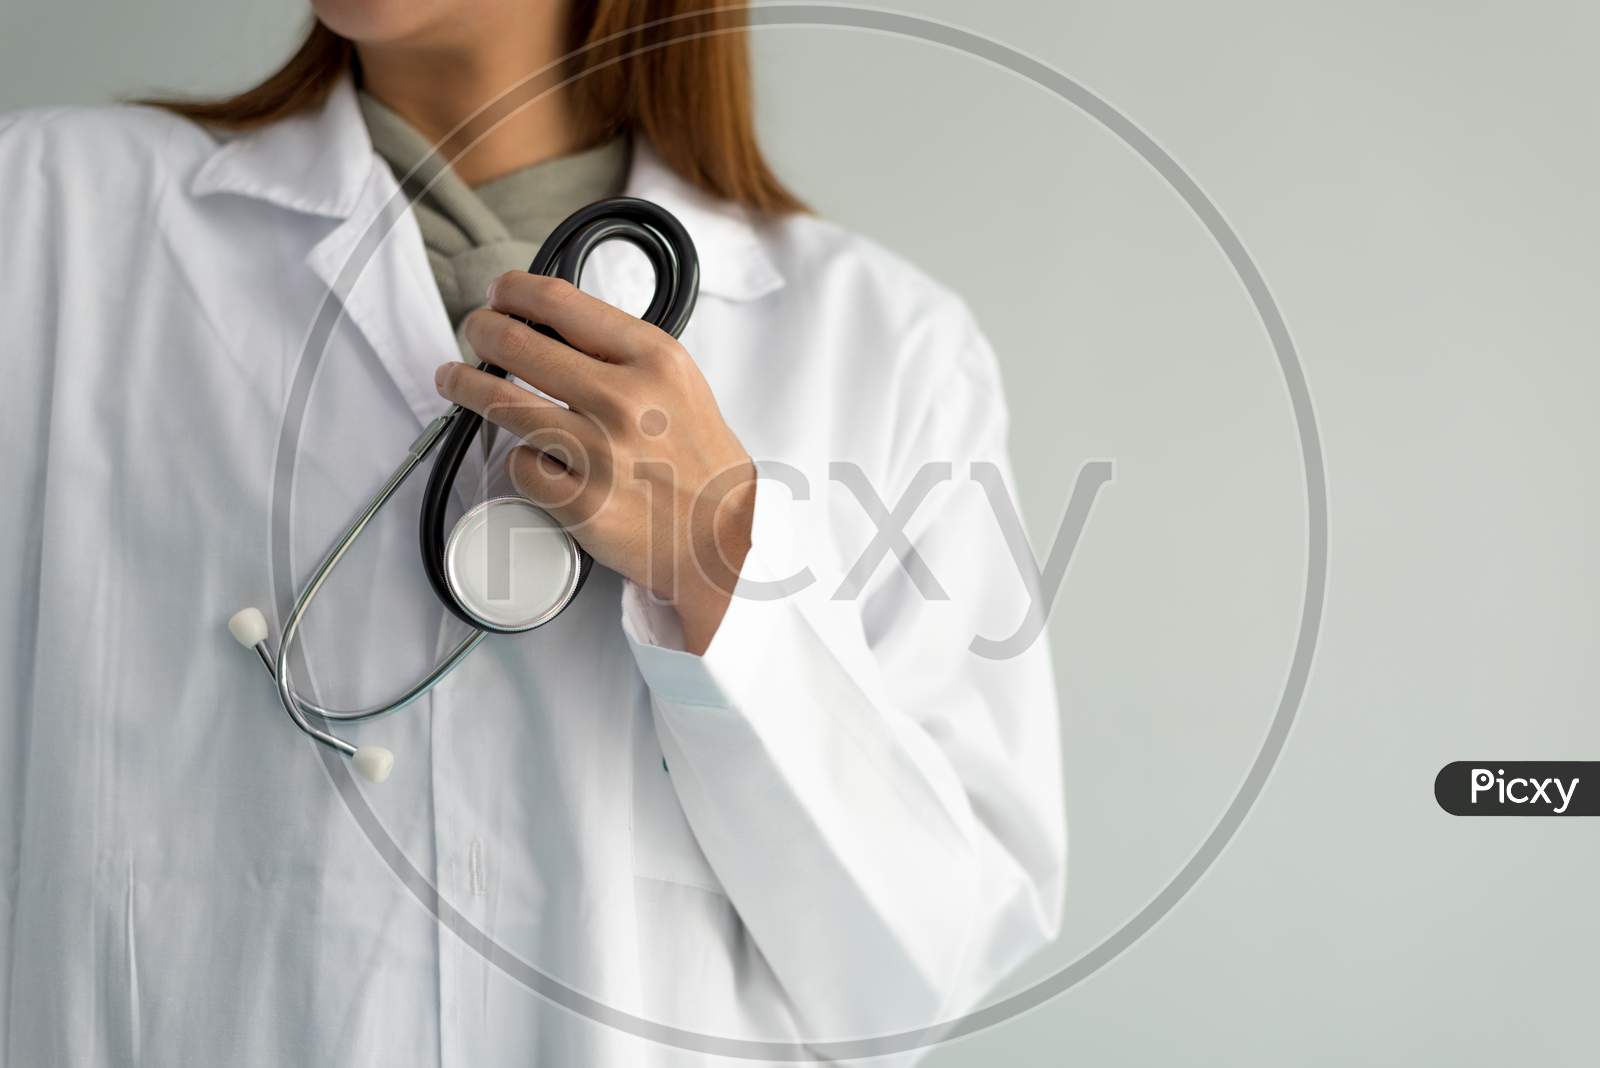 Female Doctor Is Holding Stethoscope And Hear Heart Beat Sound On White Background. Medical And Healthcare Concept. Hospital And People Theme